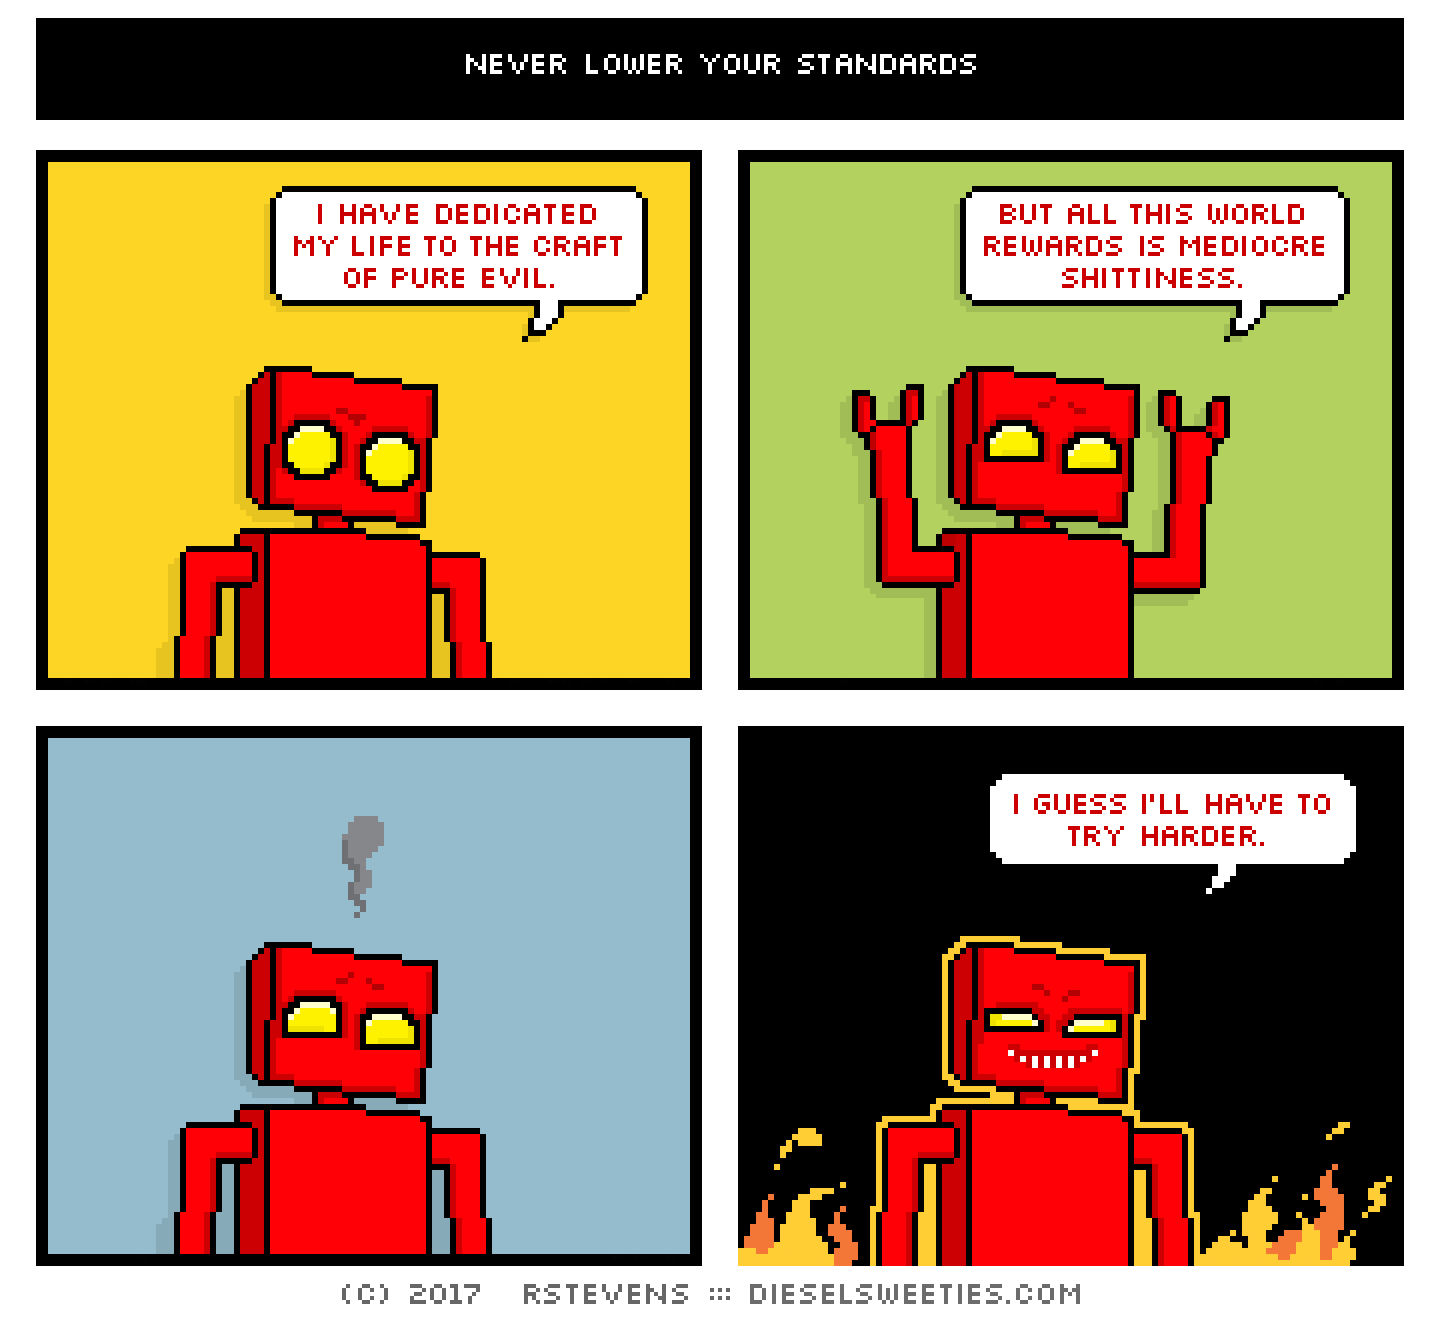 red robot : arms up flames fire : i have dedicated my life to the craft of pure evil. but all this world rewards is mediocre shittiness. i guess i'll have to try harder.